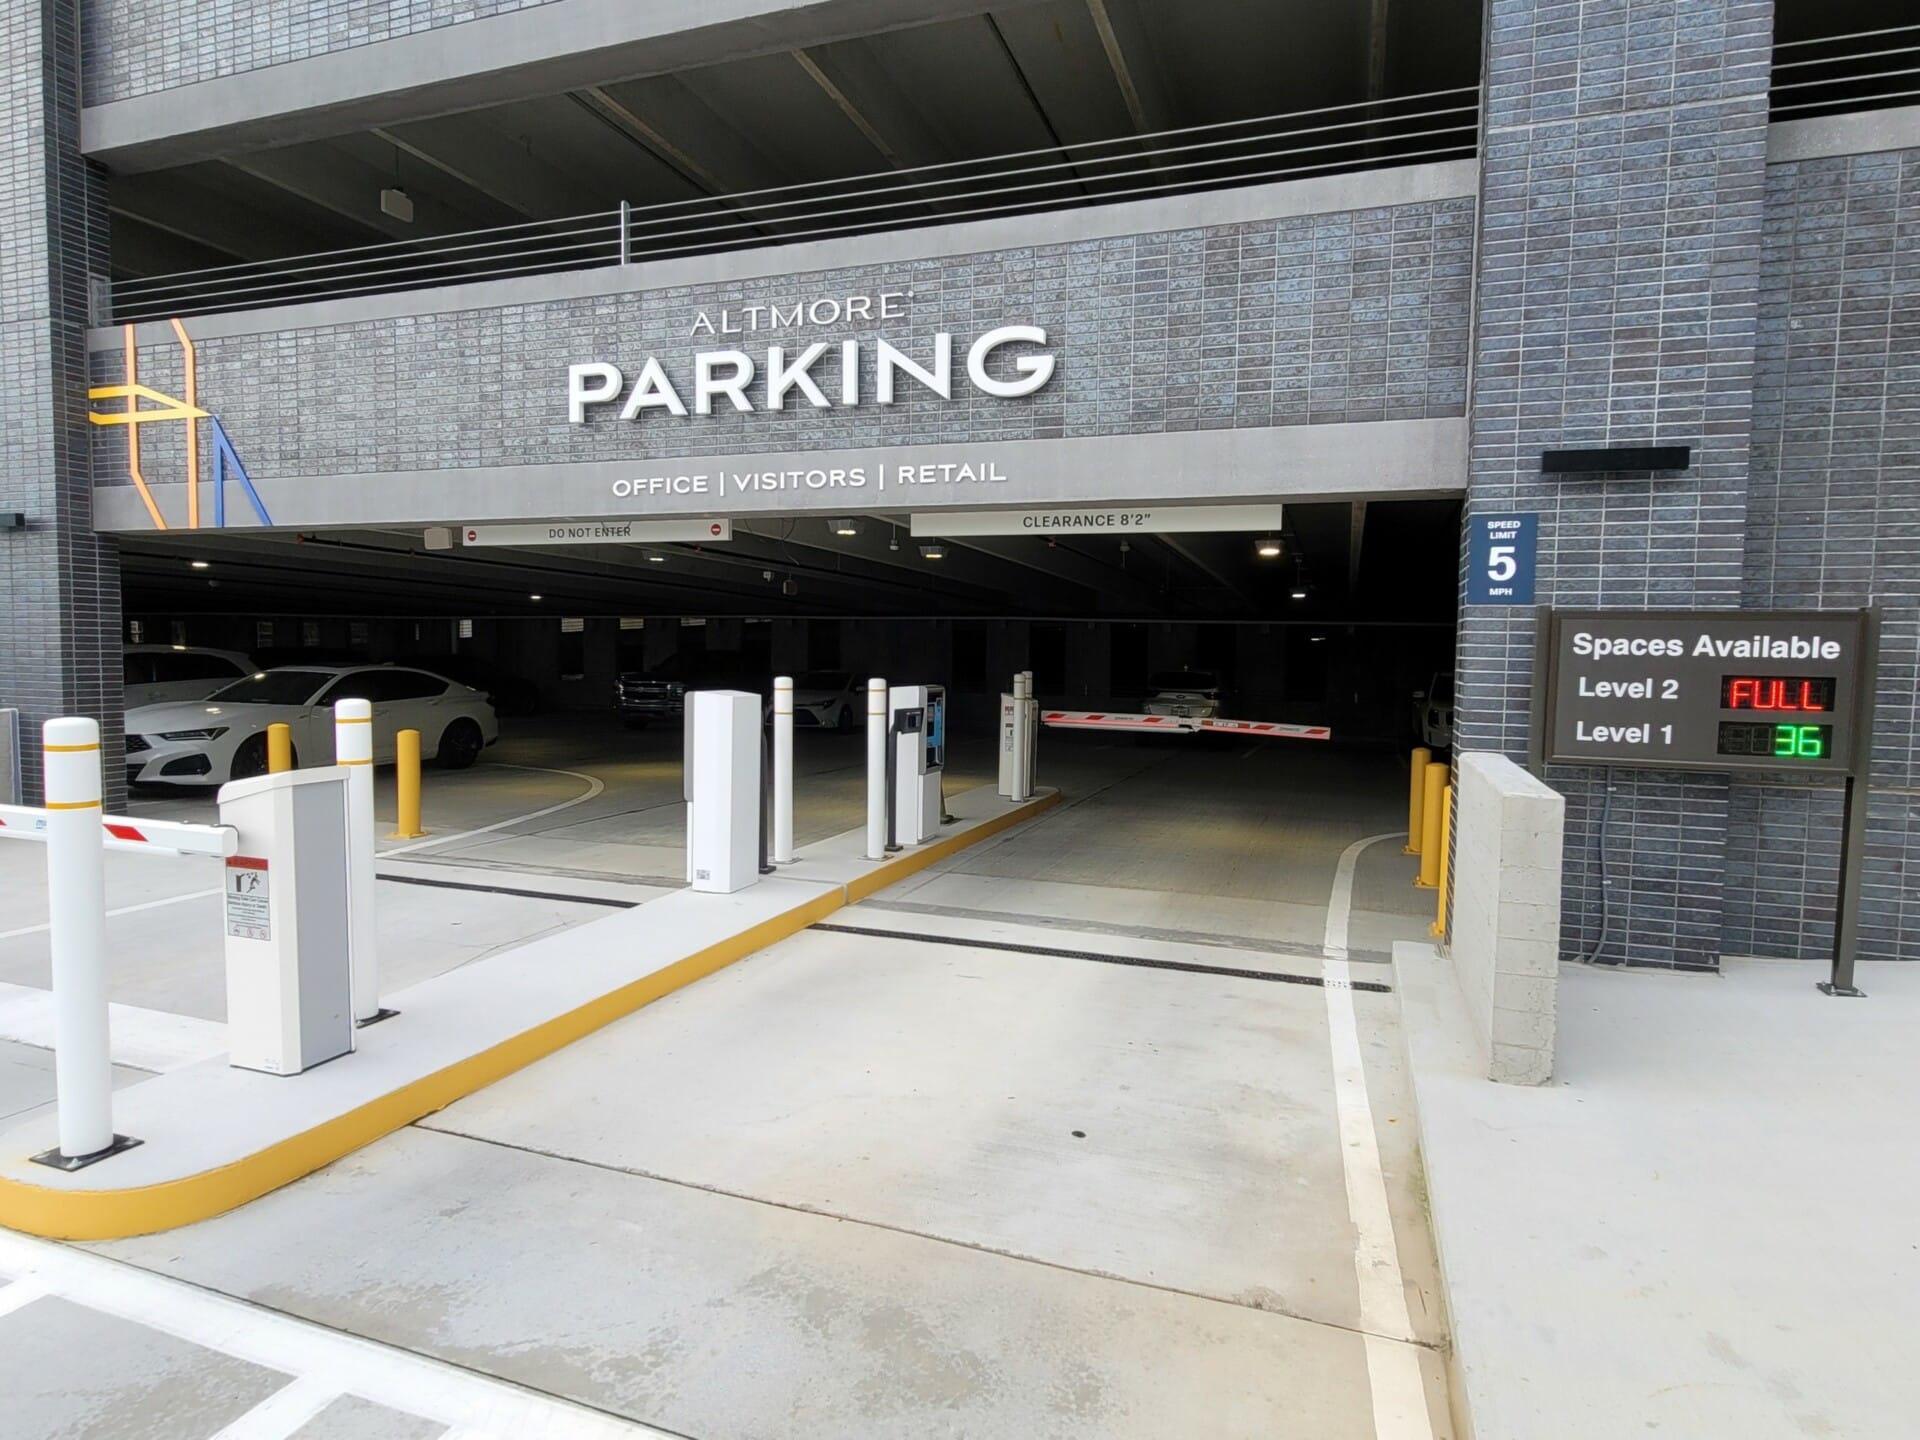 Track controlled parking space availability and display with digital sign with levels are full or number of available spaces.